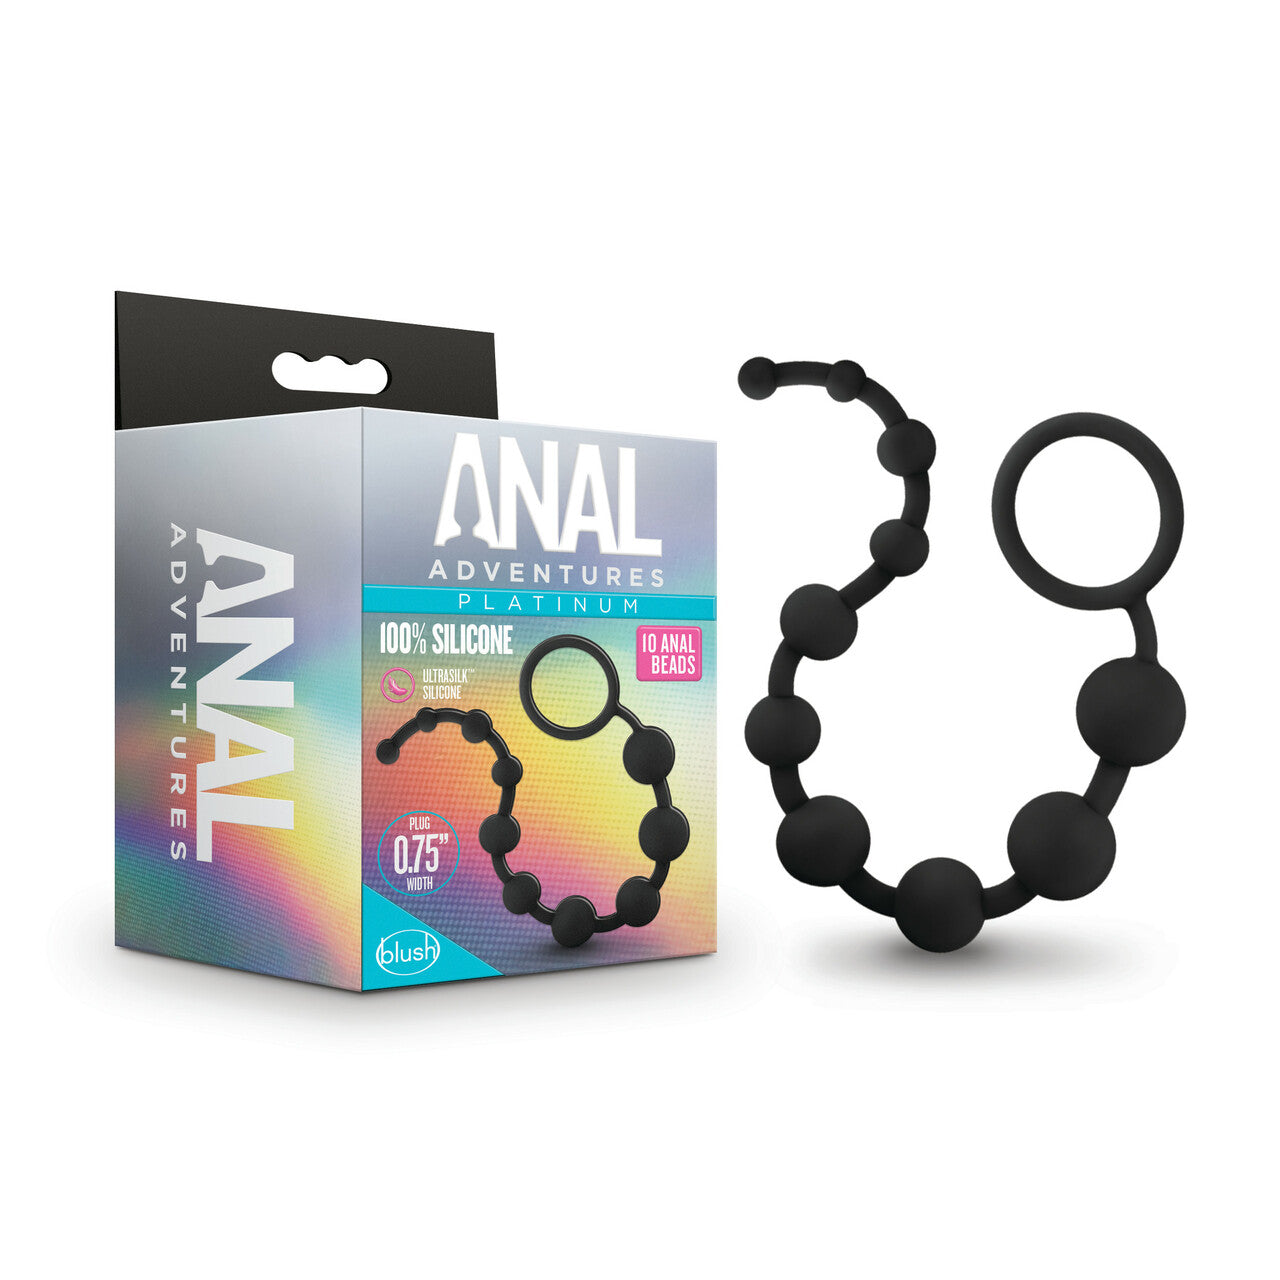 Anal Adventures: Platinum Silicone 10 Anal Beads